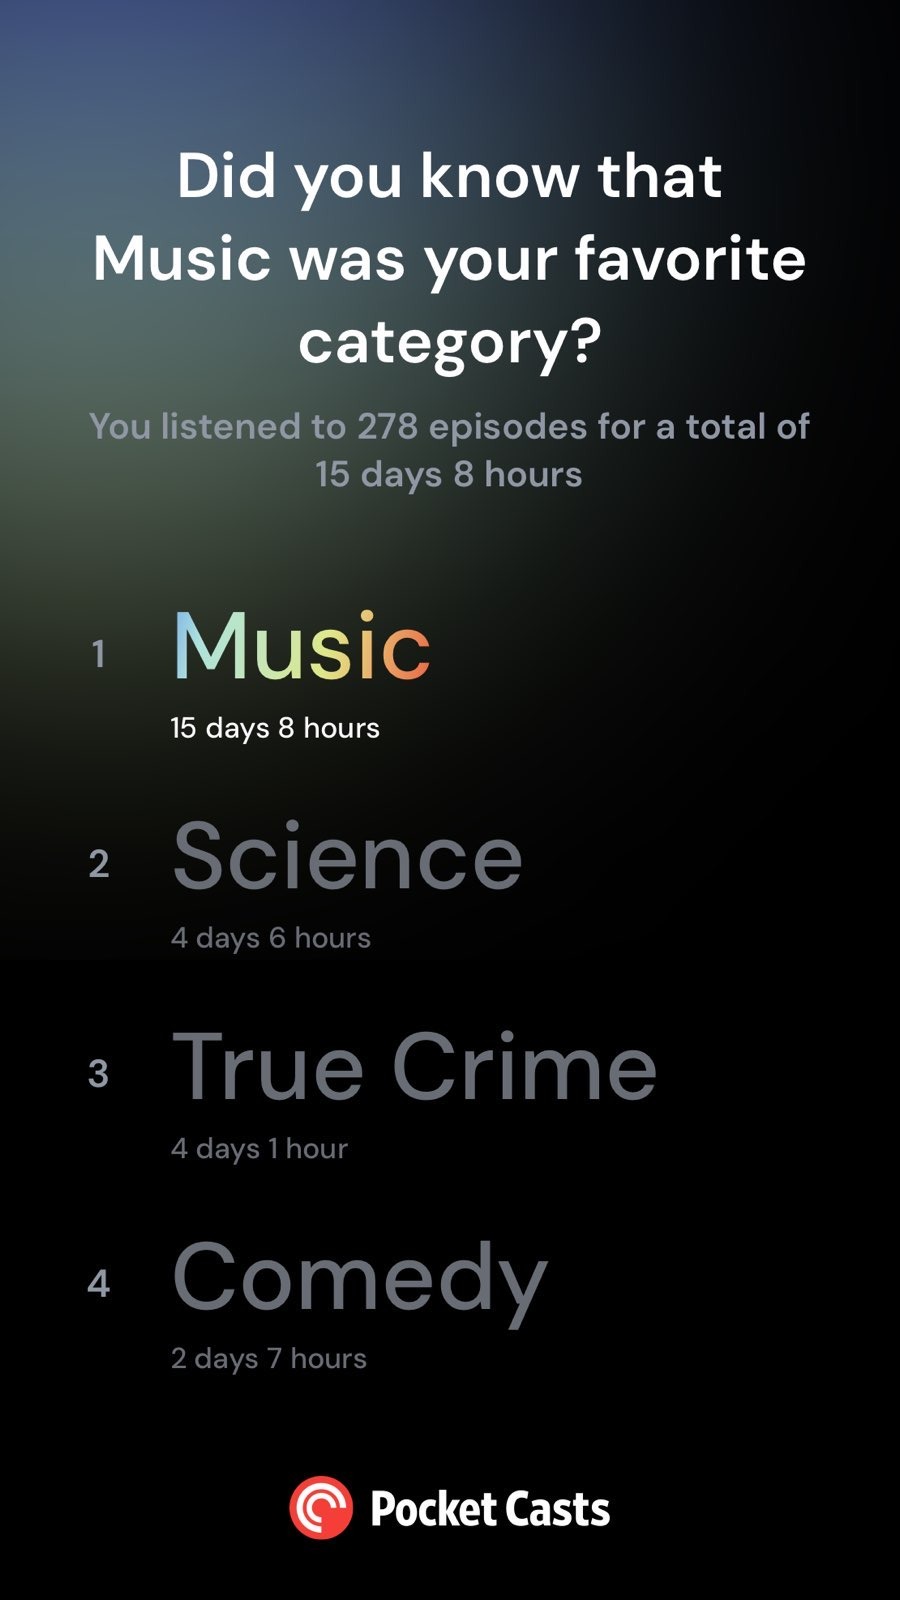 Did you know that Music was your favorite category? You listened to 278 episodes for a total of 15 days 8 hours

1. Music (15 days 8 hours)
2. Science (4 days 6 hours)
3. True Crime (4 days 1 hour)
4. Comedy (2 days 7 hours)